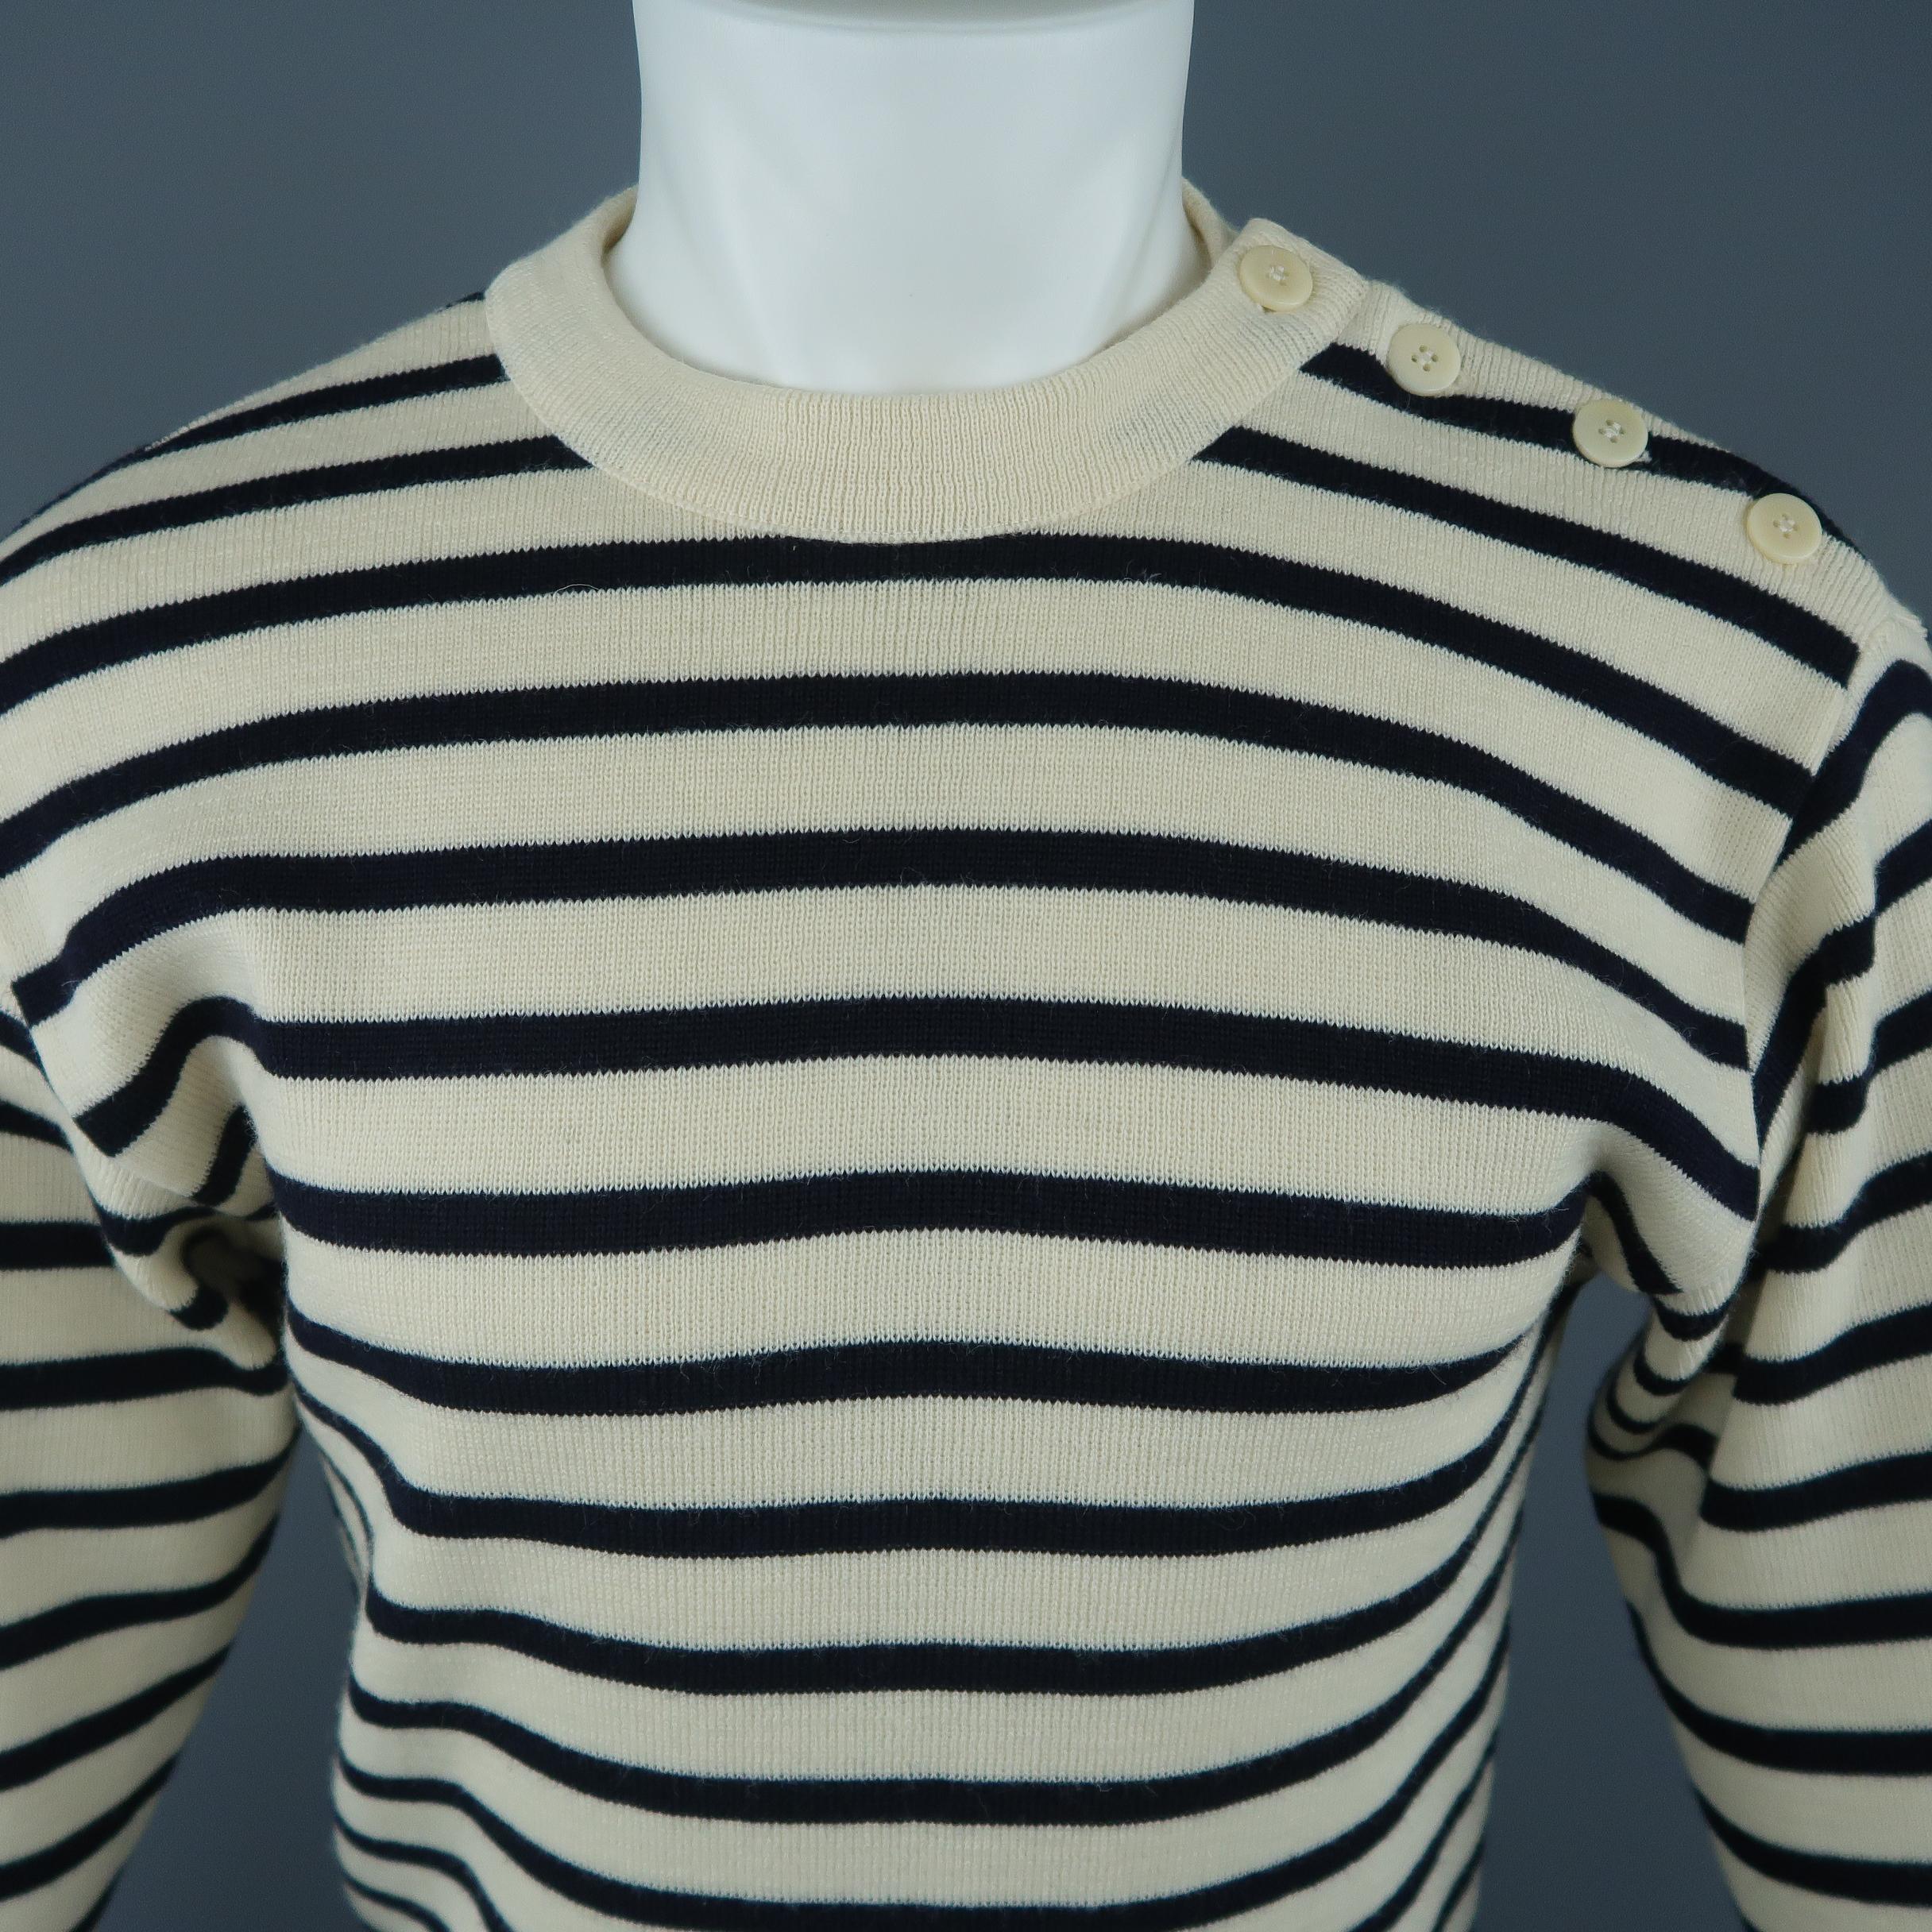 ARMOR-LUX French Sailor pullover sweater comes in creamy beige and deep navy blue striped wool knit with a ribbed button shoulder crewneck and cuffs. Made in Italy.
 
Excellent Pre-Owned Condition.
Marked: JP 2
 
Measurements:
 
Shoulder: 19